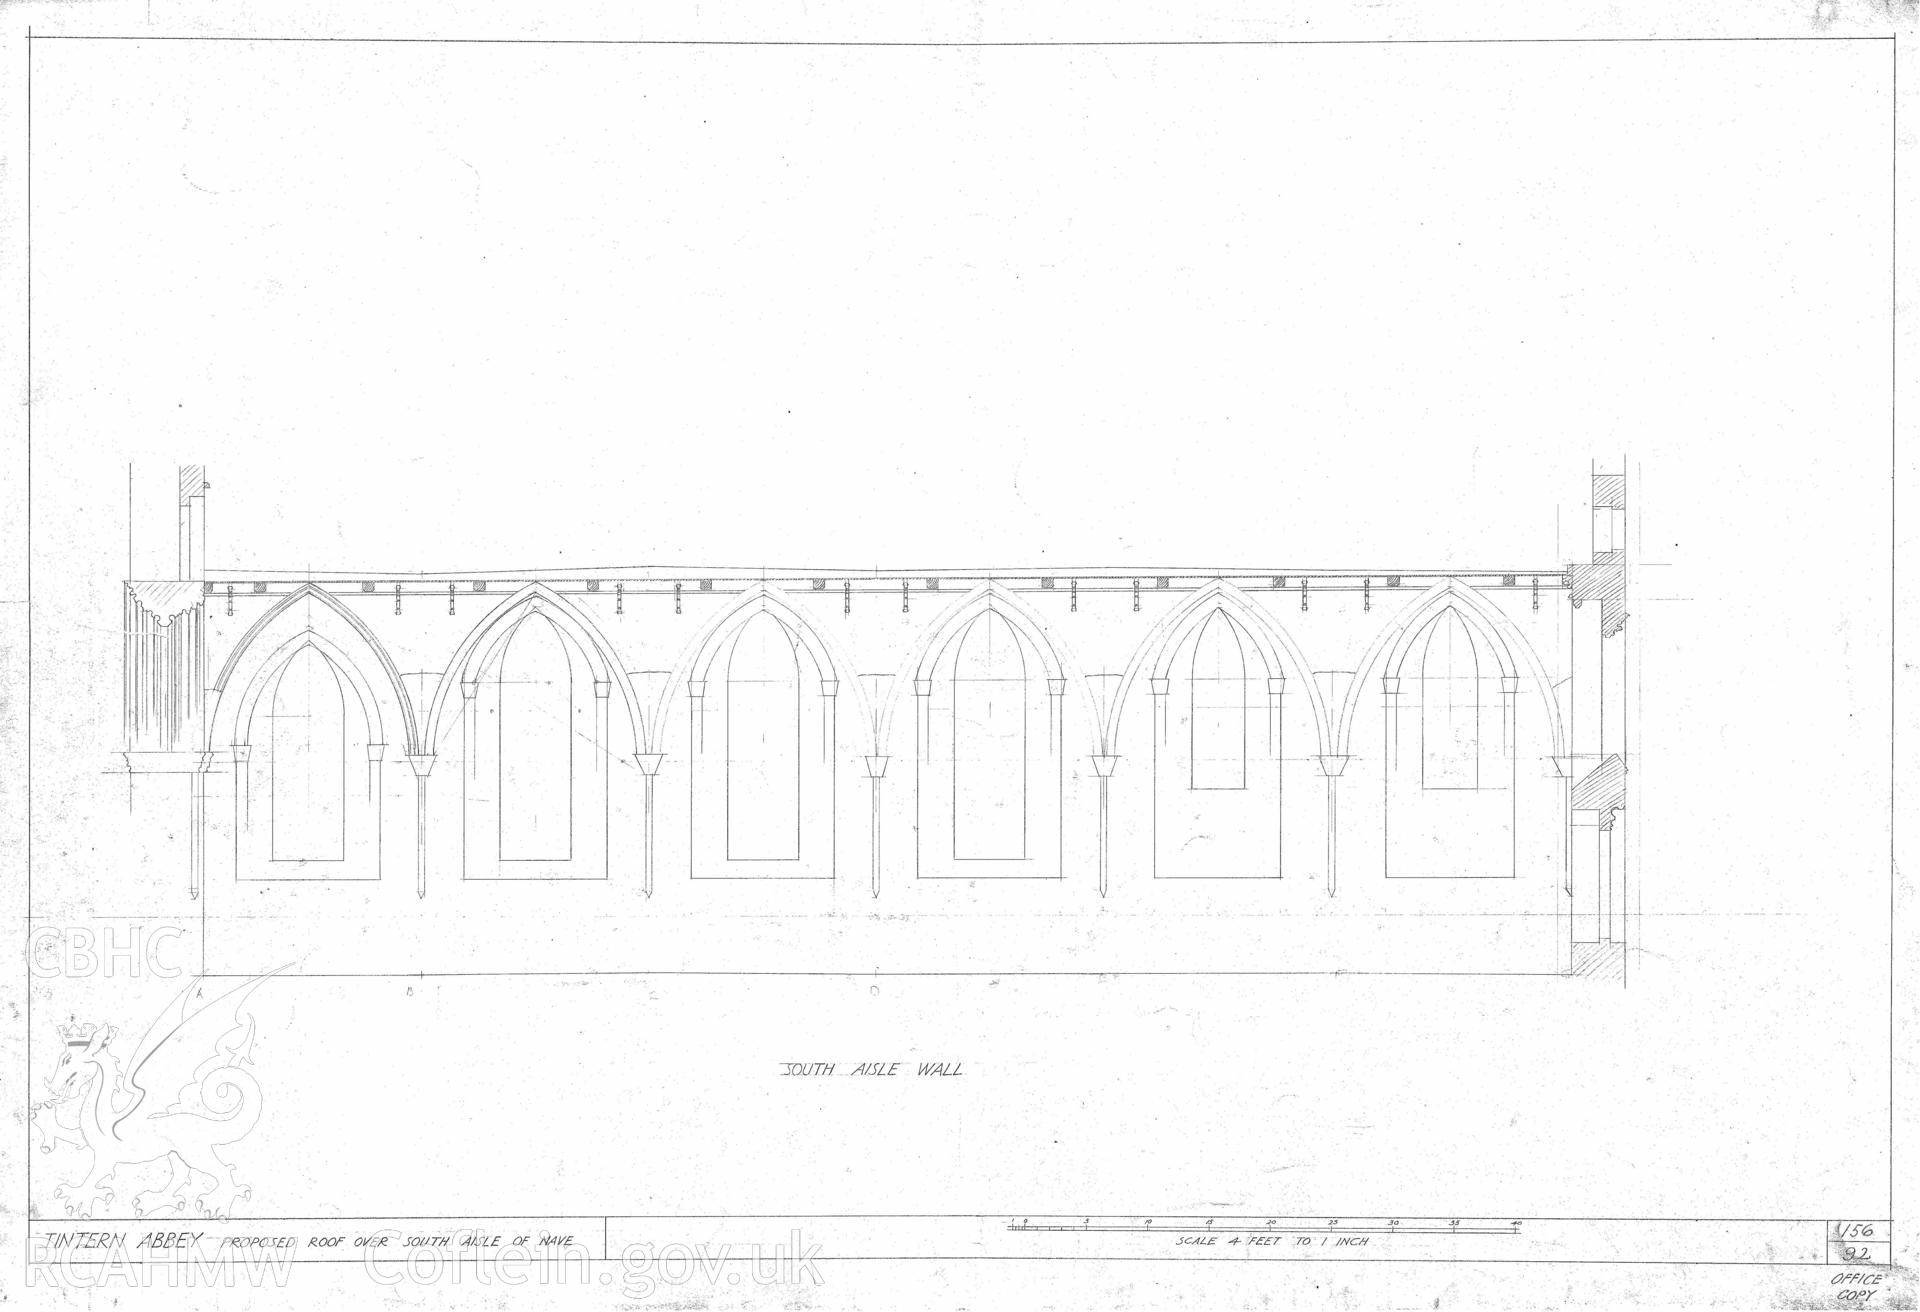 Cadw guardianship monument drawing of Tintern Abbey. Proposed roof over S Aisle of Nave. Cadw ref. No. 156/92. Scale 1:48.